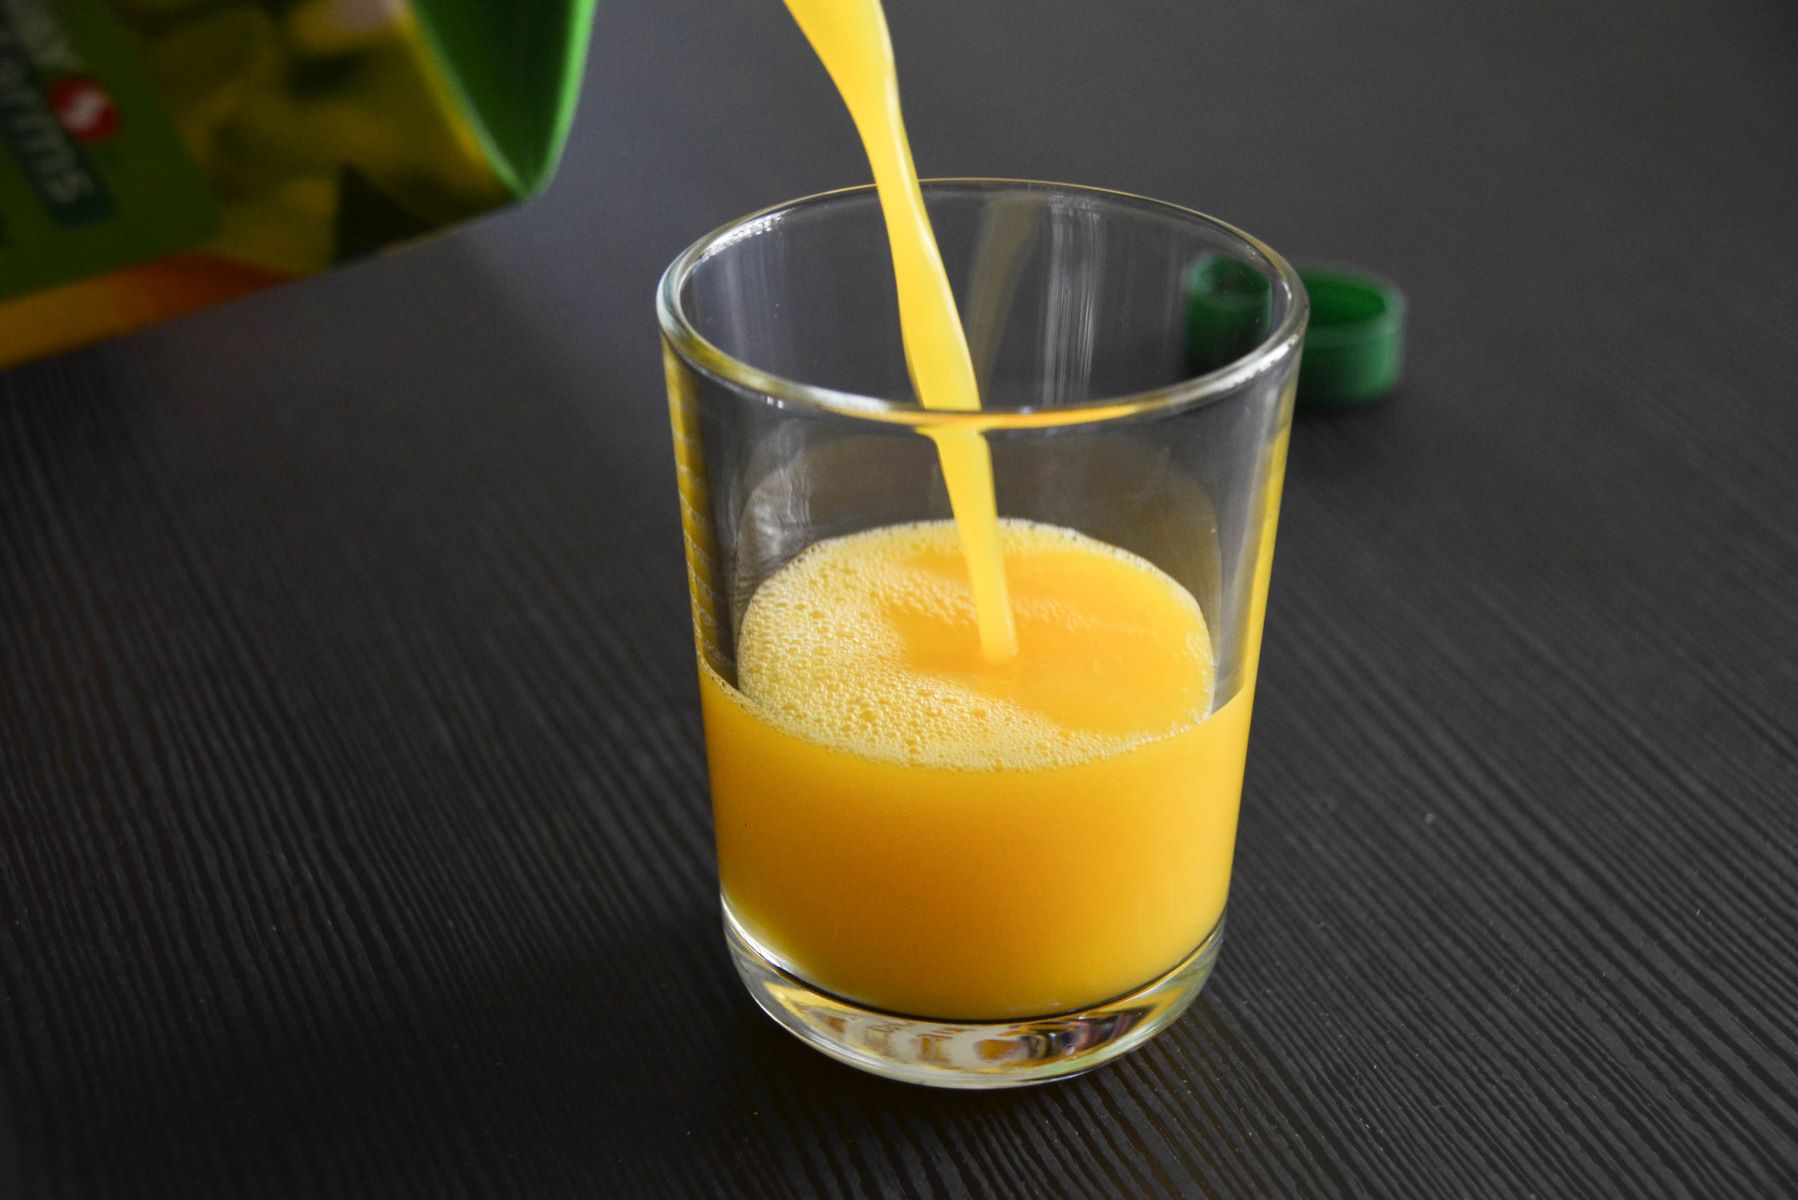 You Won’t Believe What Happened To This Unopened Orange Juice Left Out Overnight!